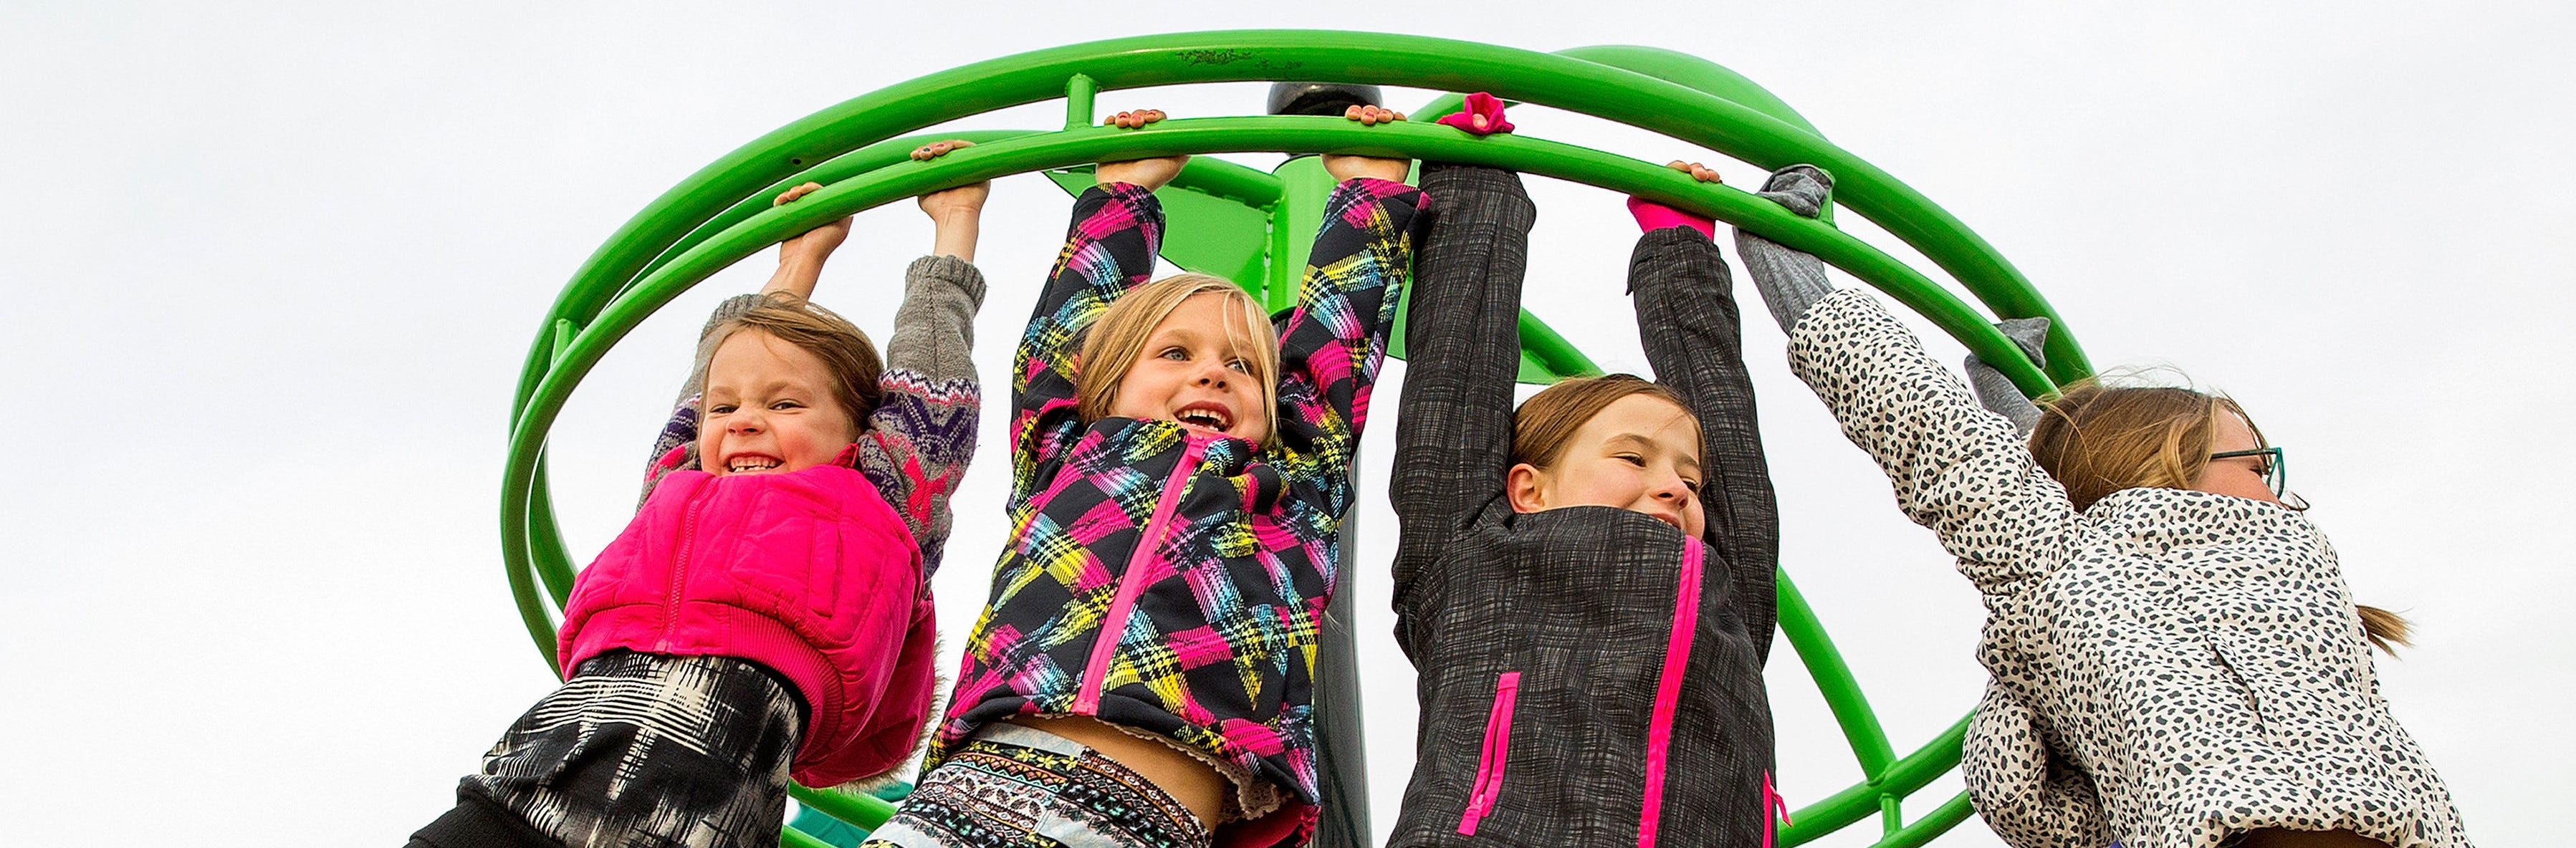 Our Three Tips to Prepare Your Playground for the Winter